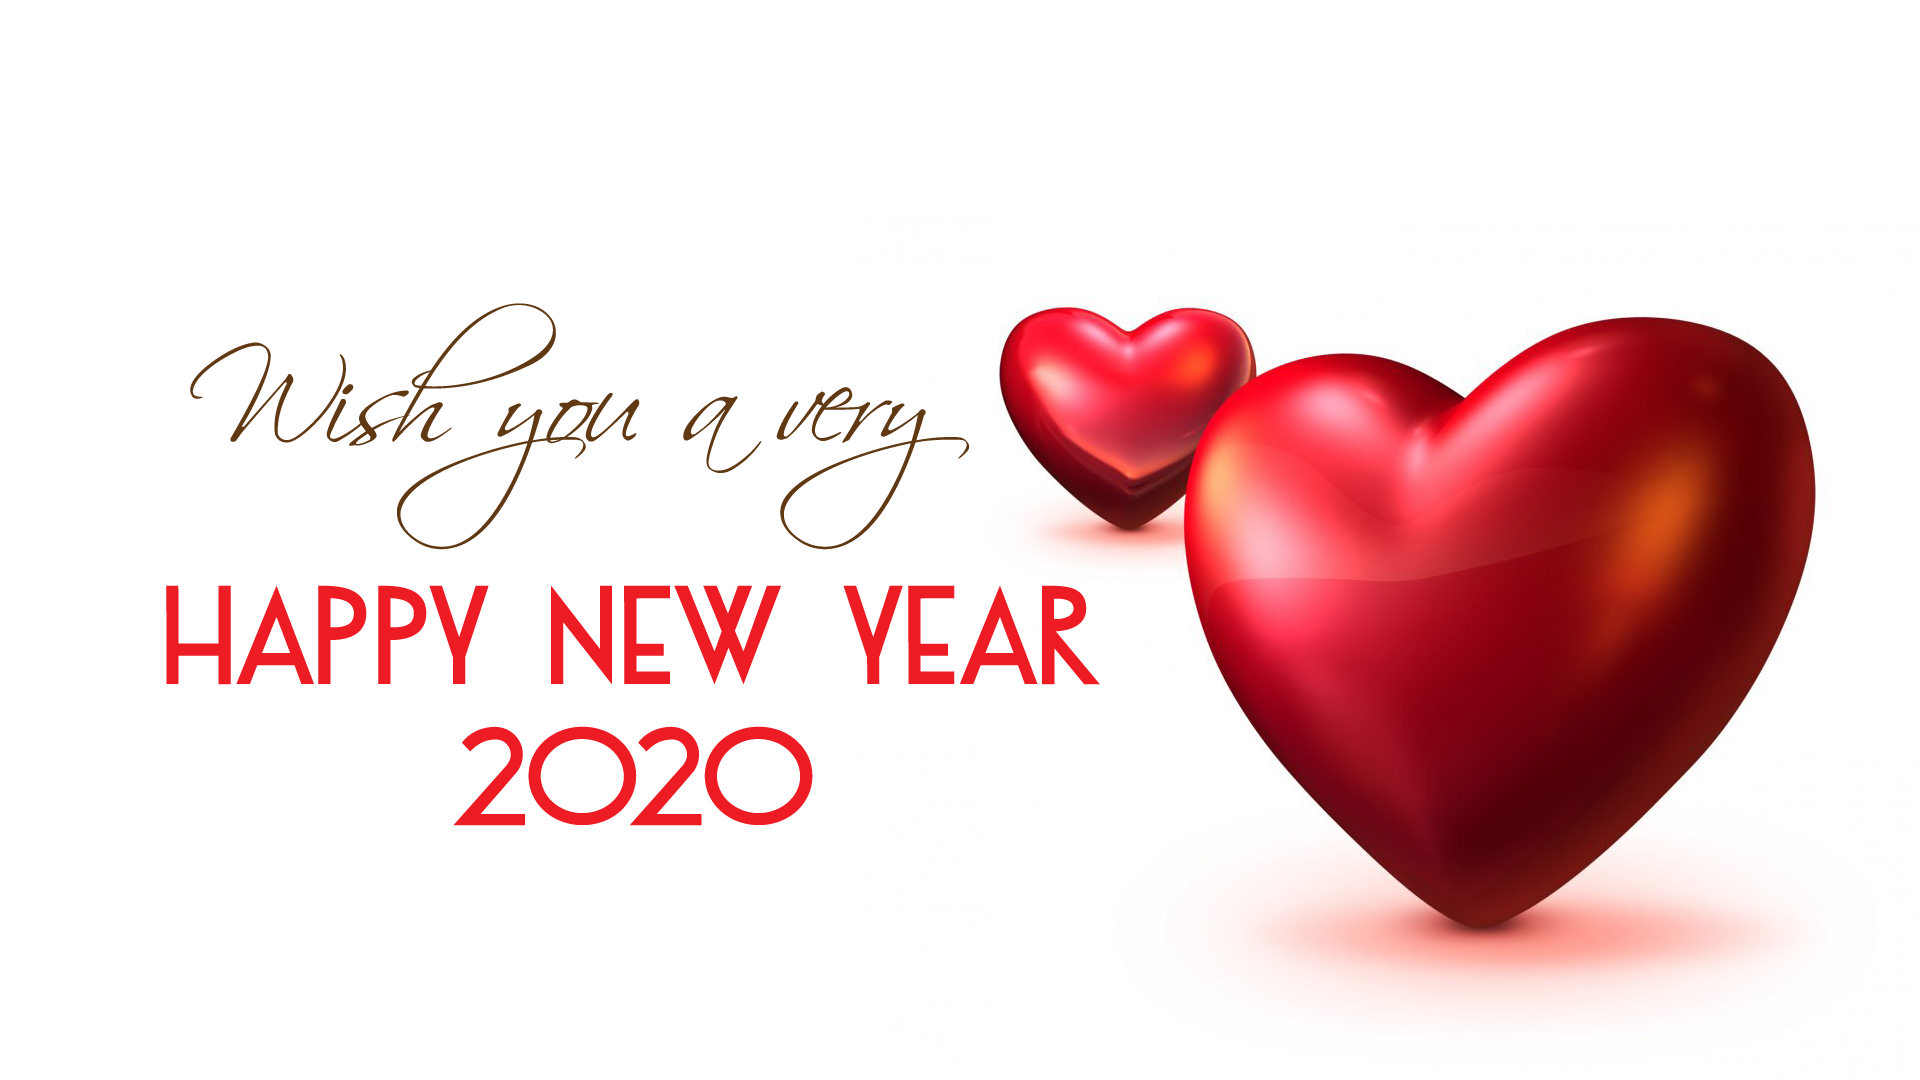 Wish You a Very Happy New Year 2020 Love Heart Wallpaper